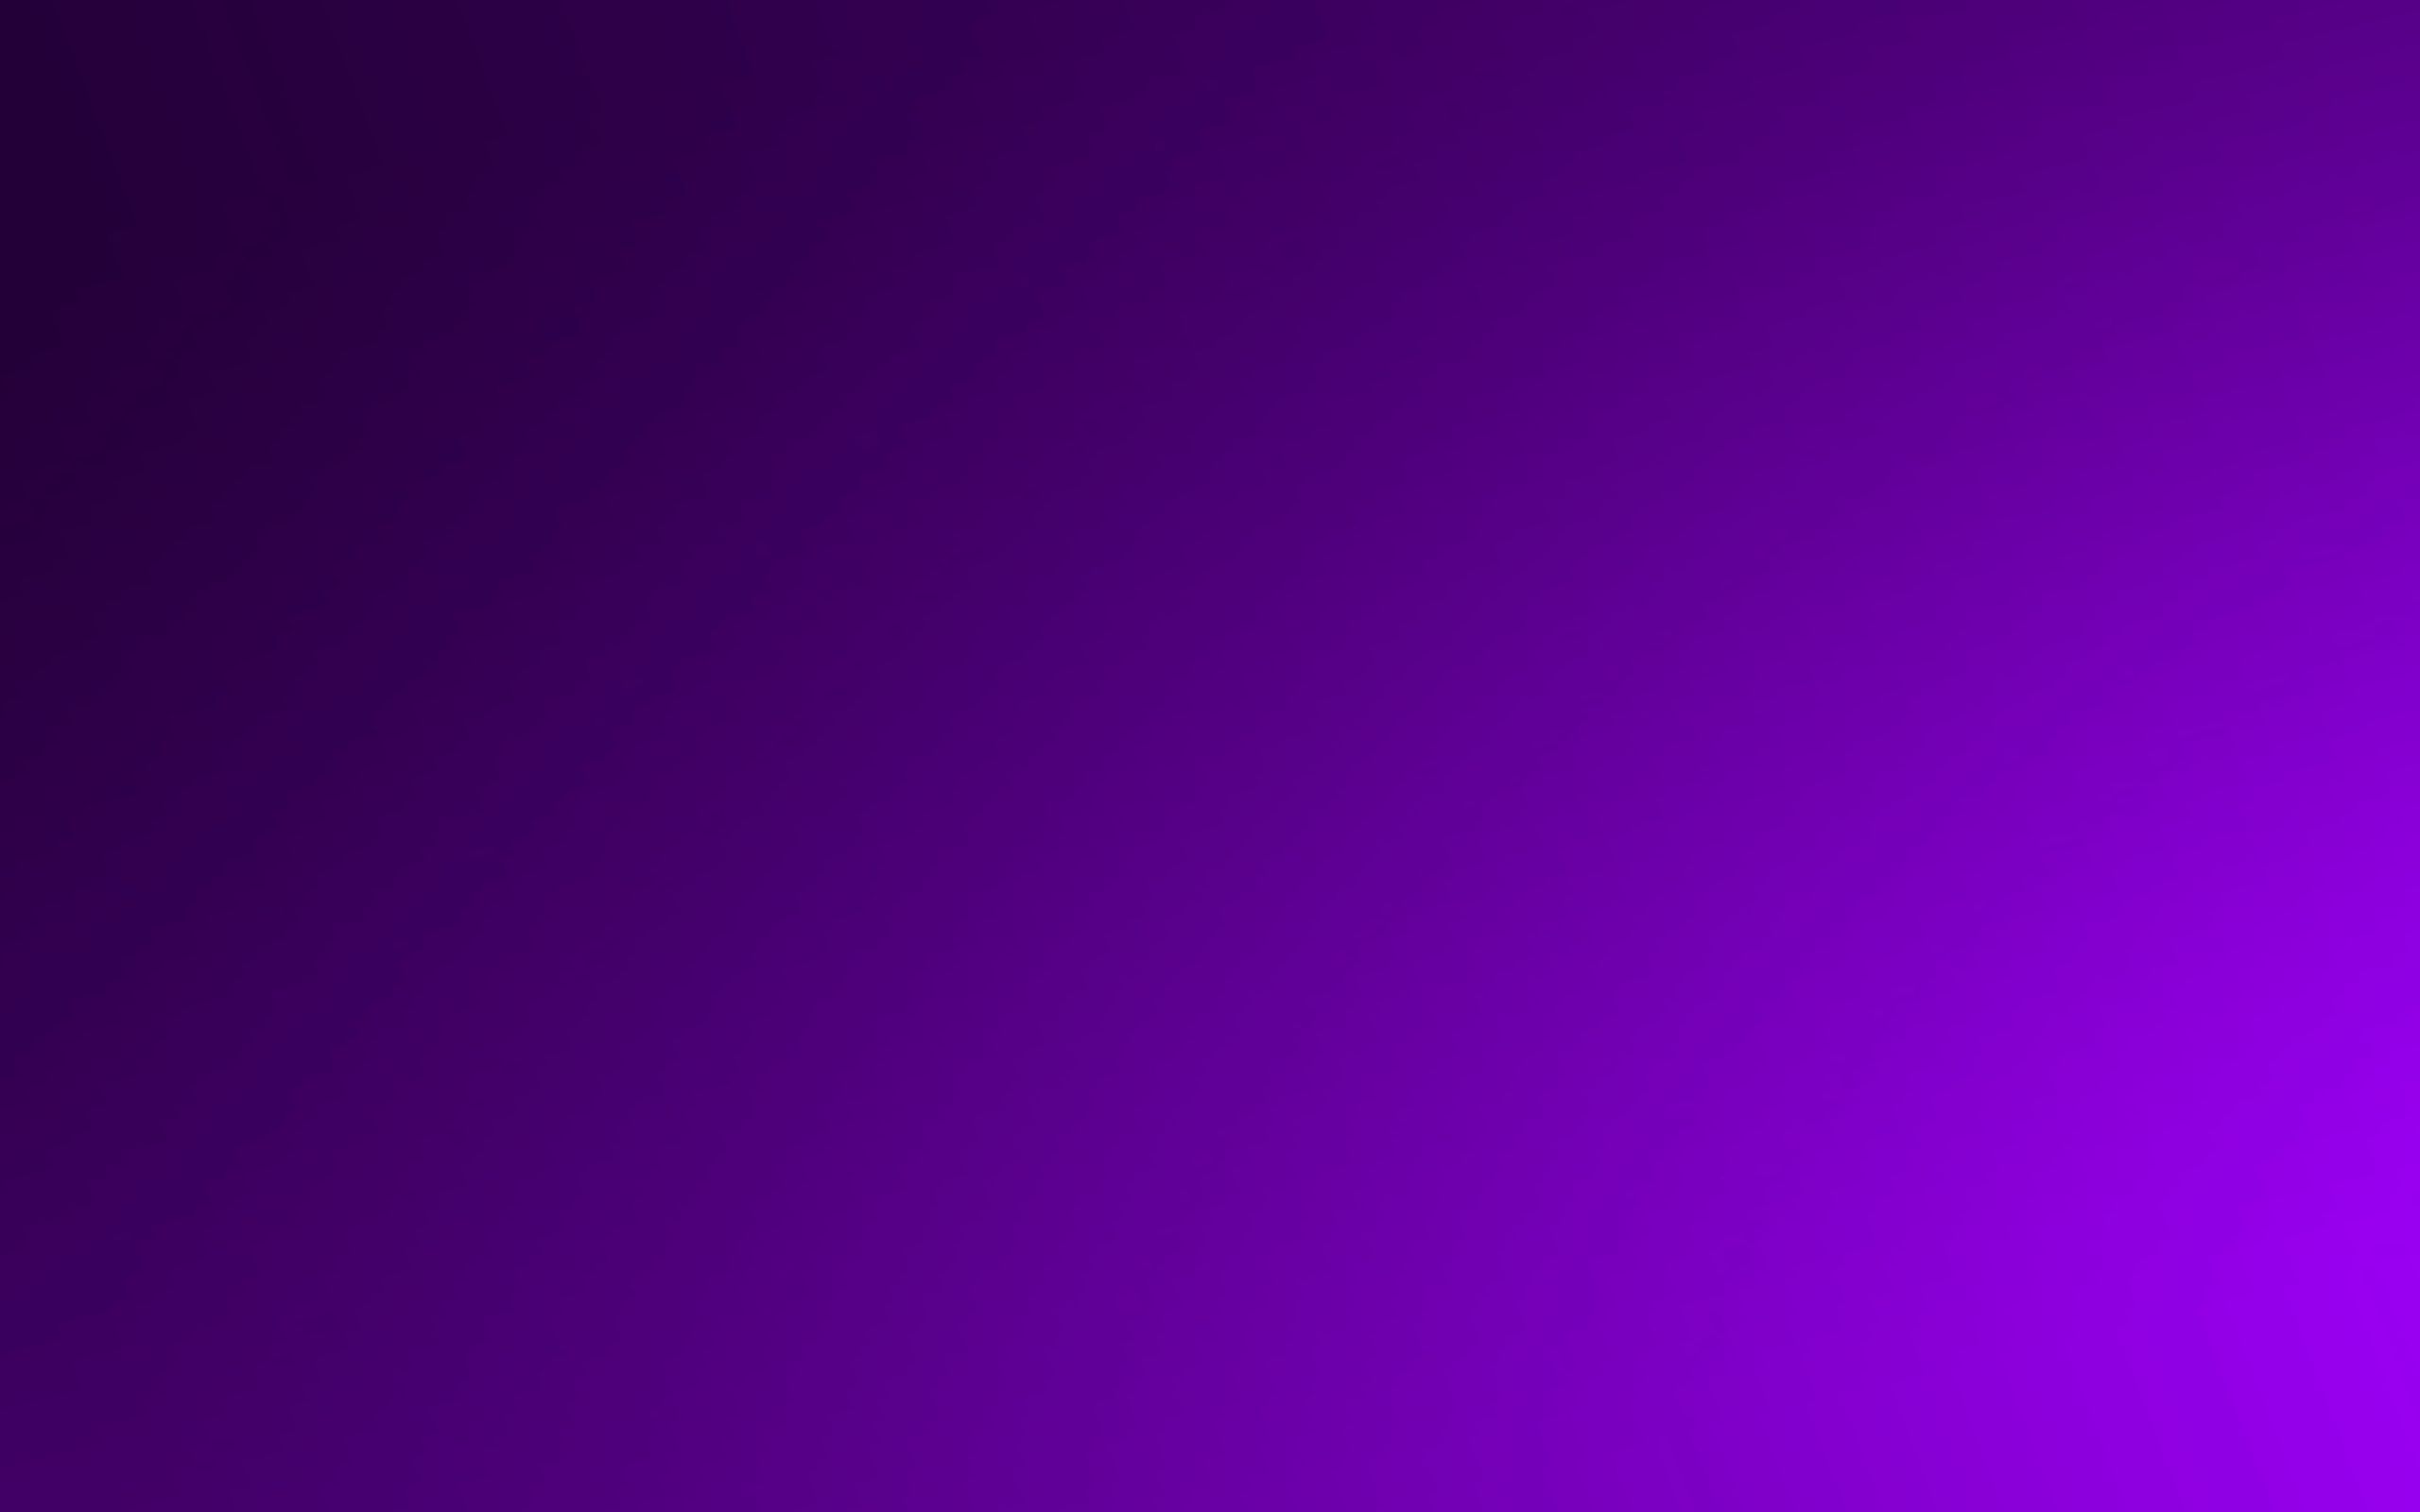 android solid, violet, background, abstract, purple